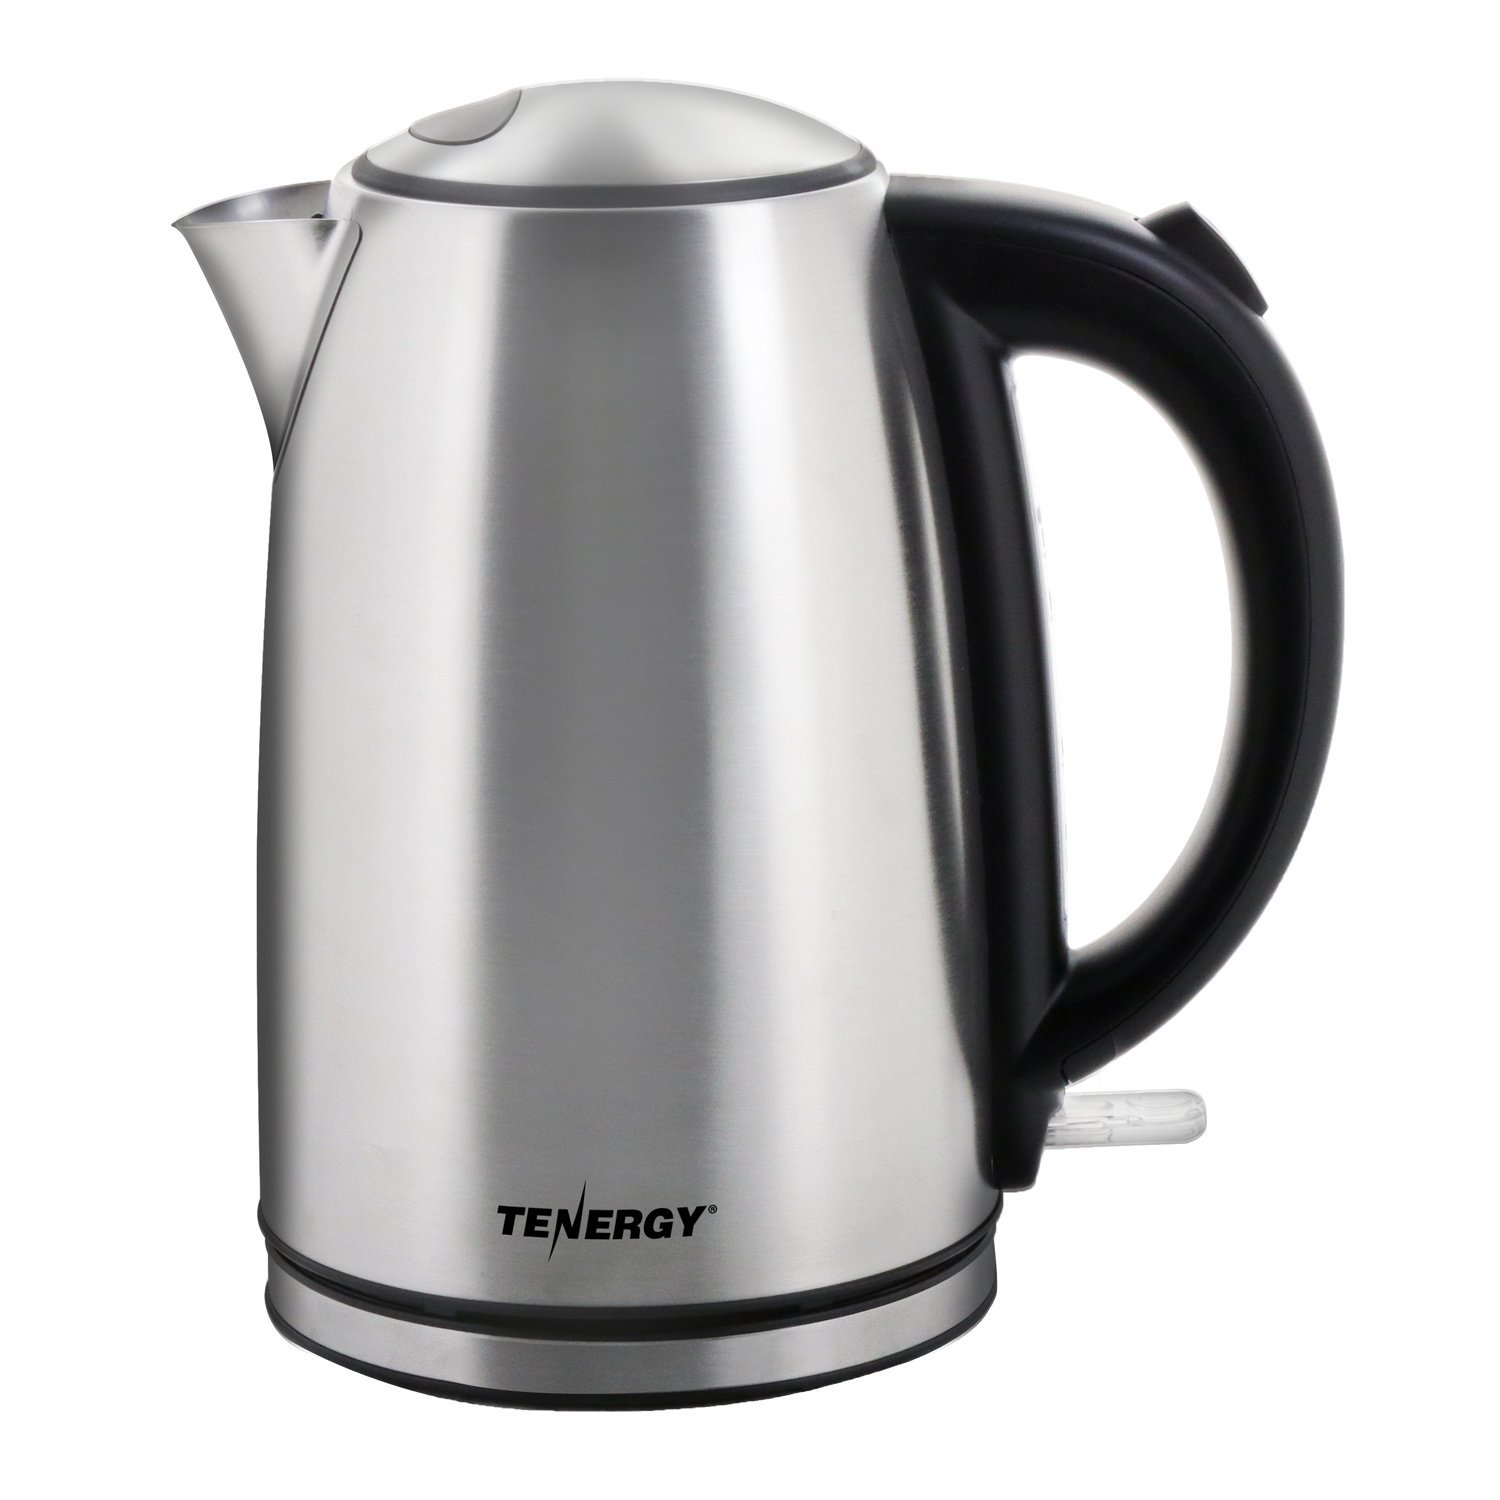 Today only: Tenergy stainless steel electric kettle for $17